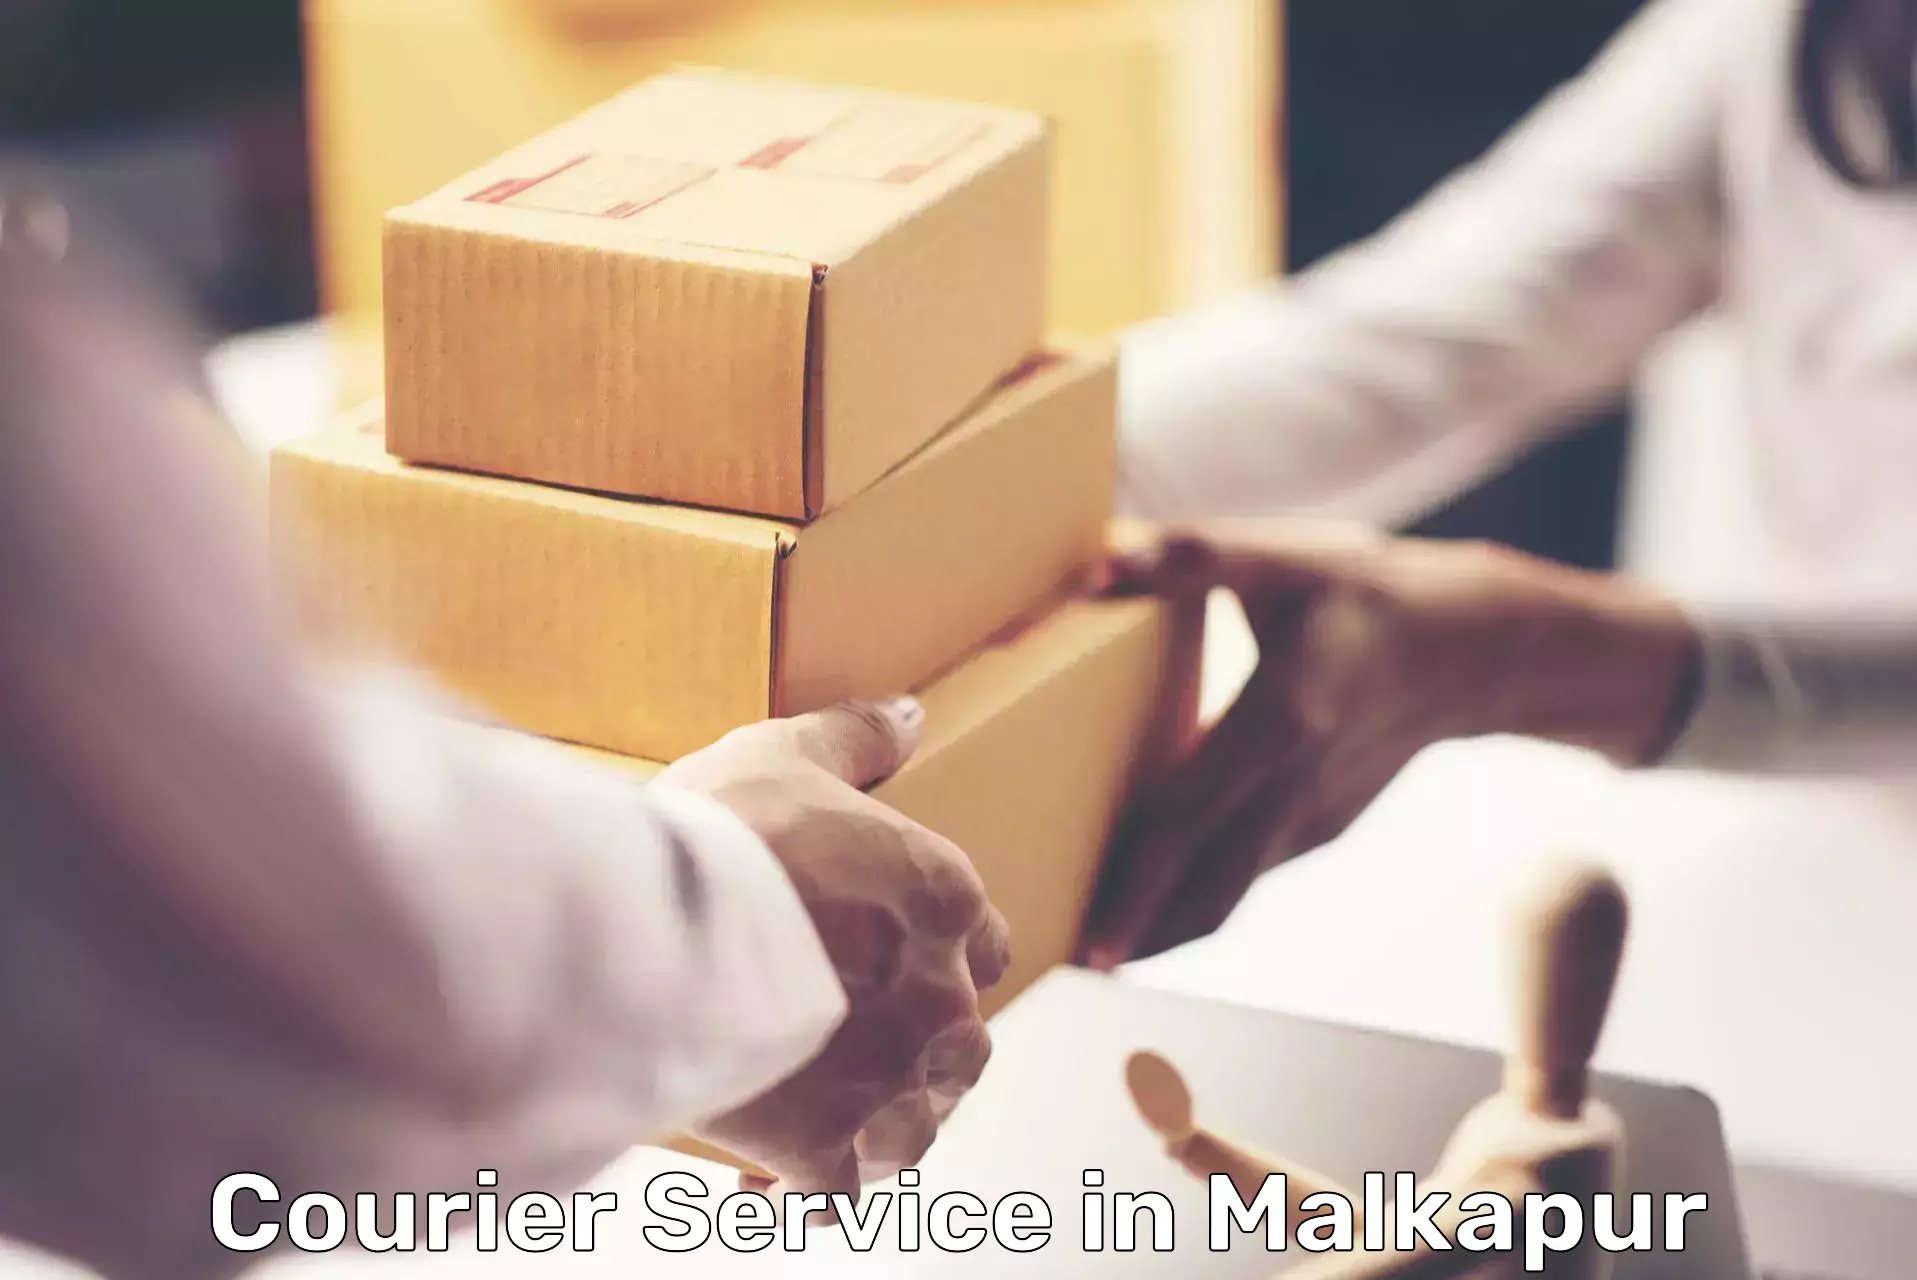 Reliable parcel services in Malkapur